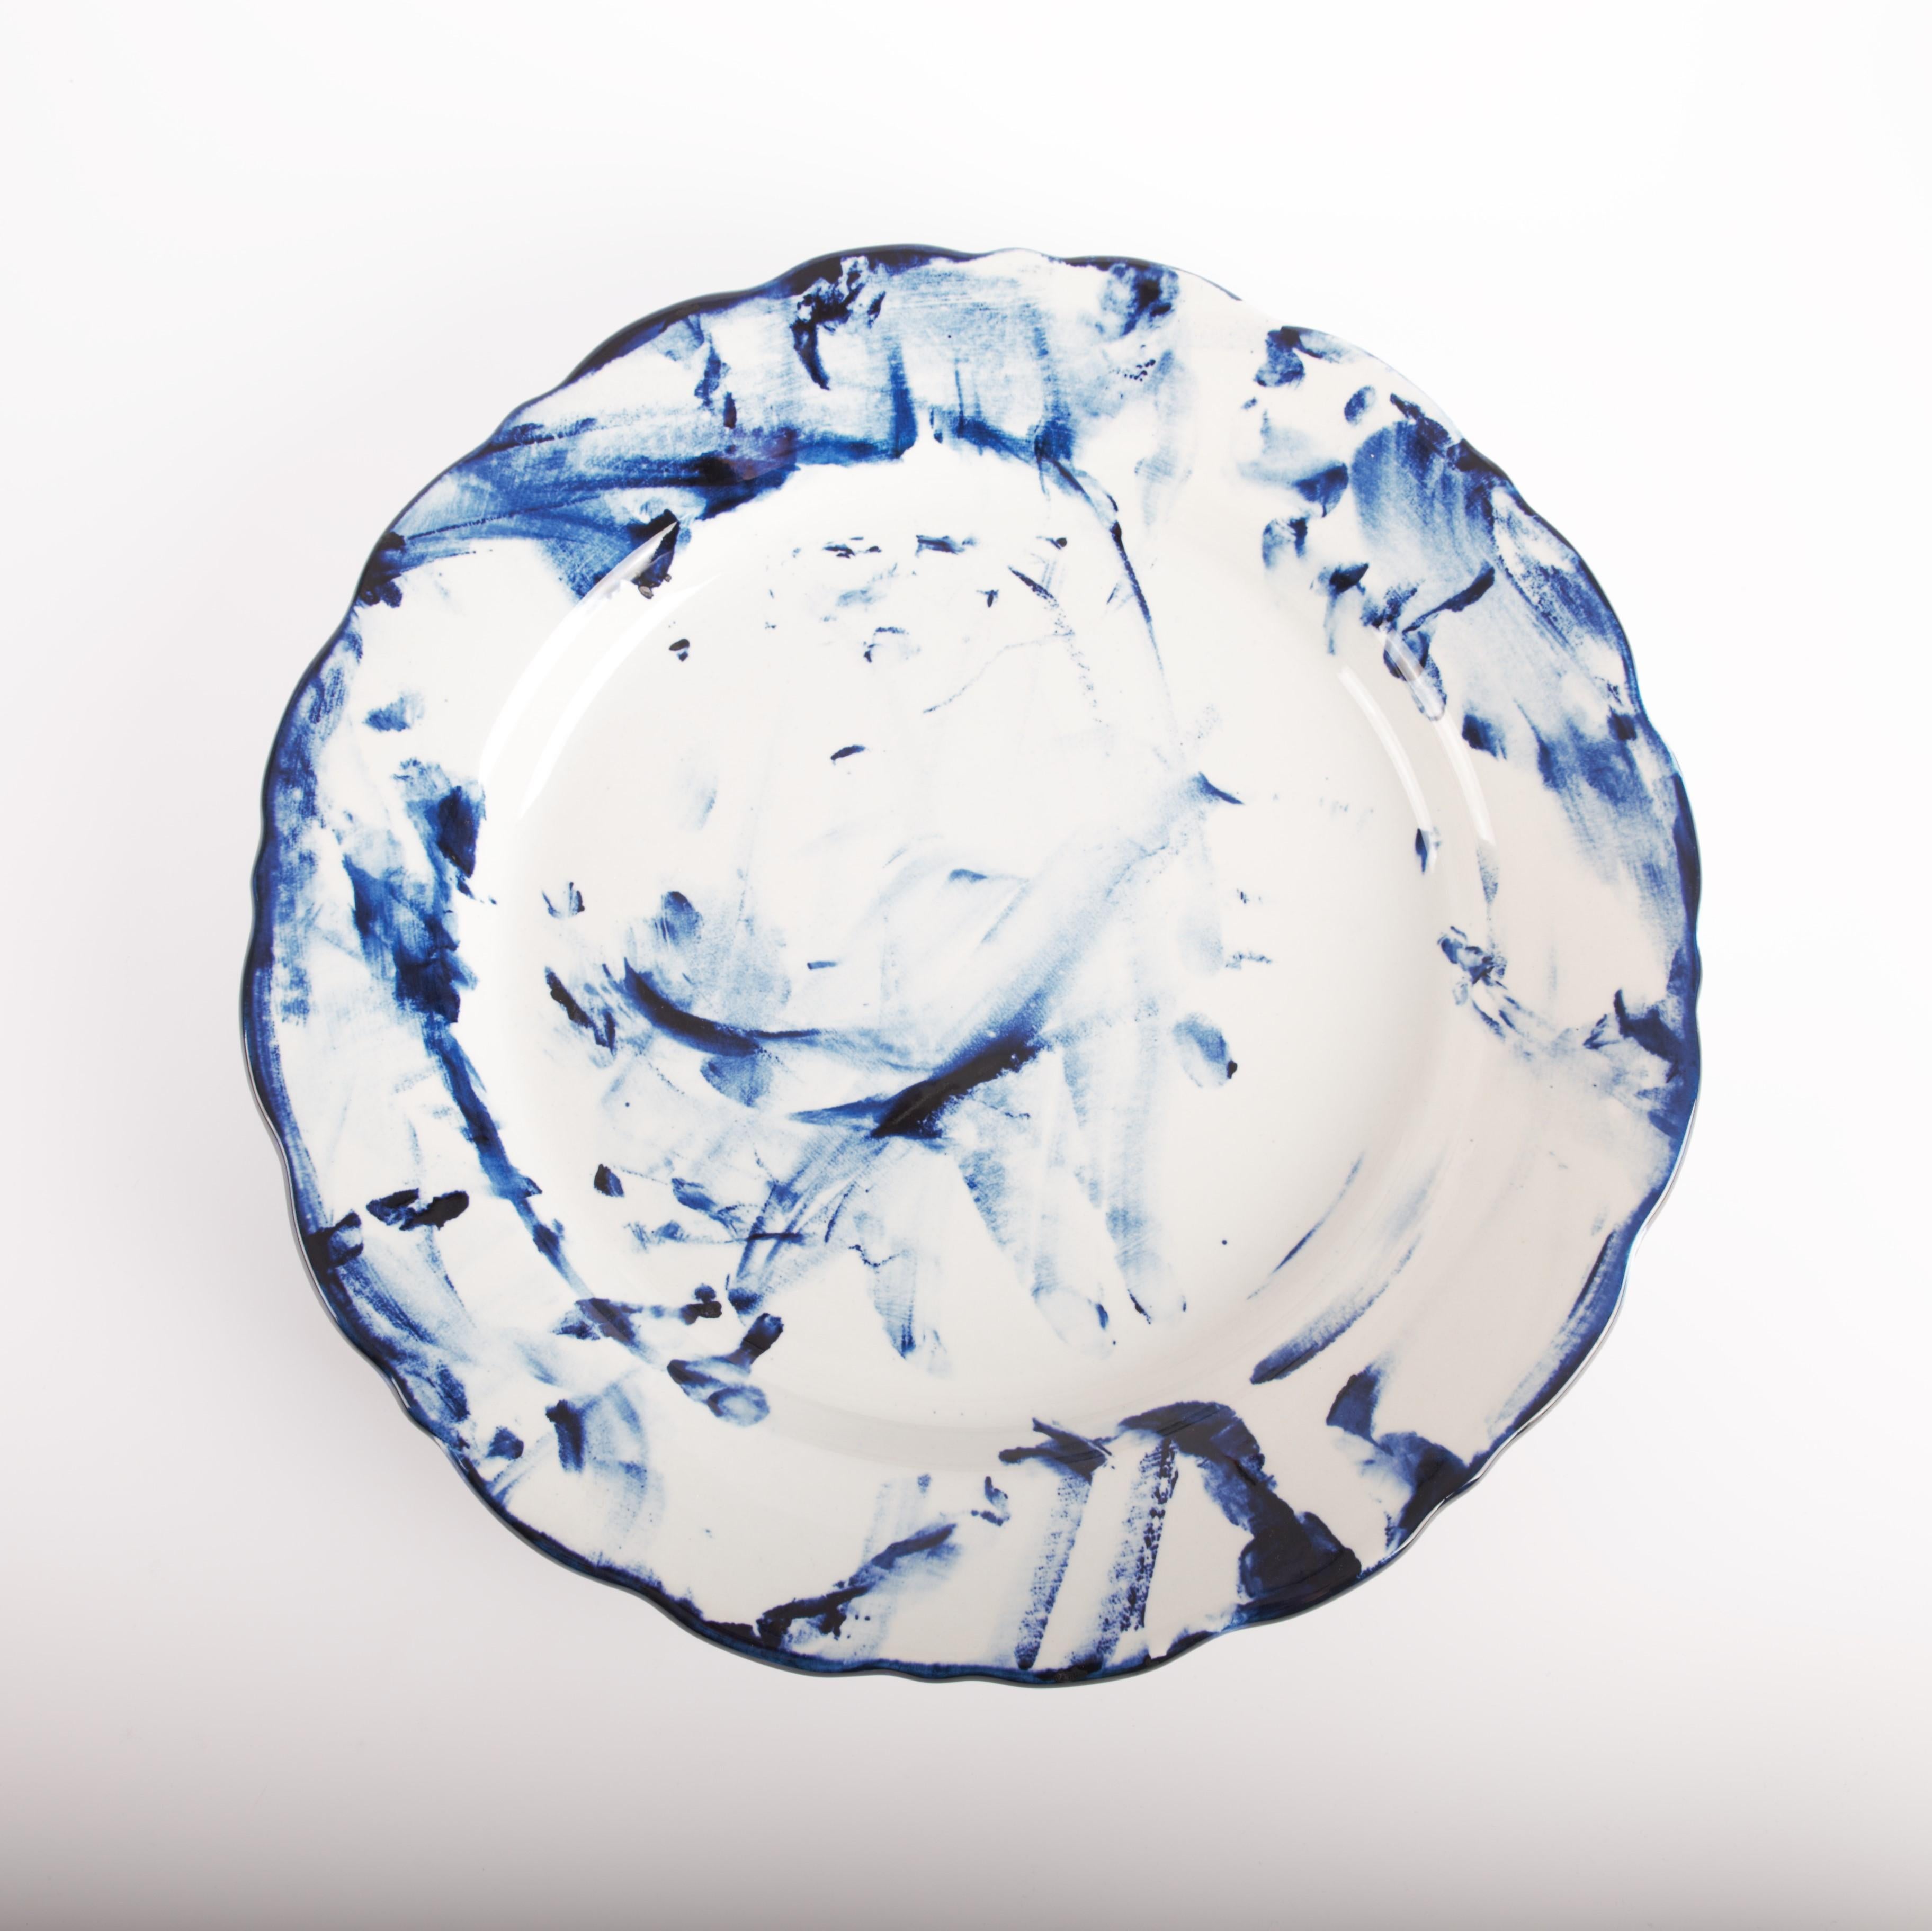 Dutch Set of two Delft Blue Plates, by Marcel Wanders, Hand-Painted, 2006, Unique For Sale